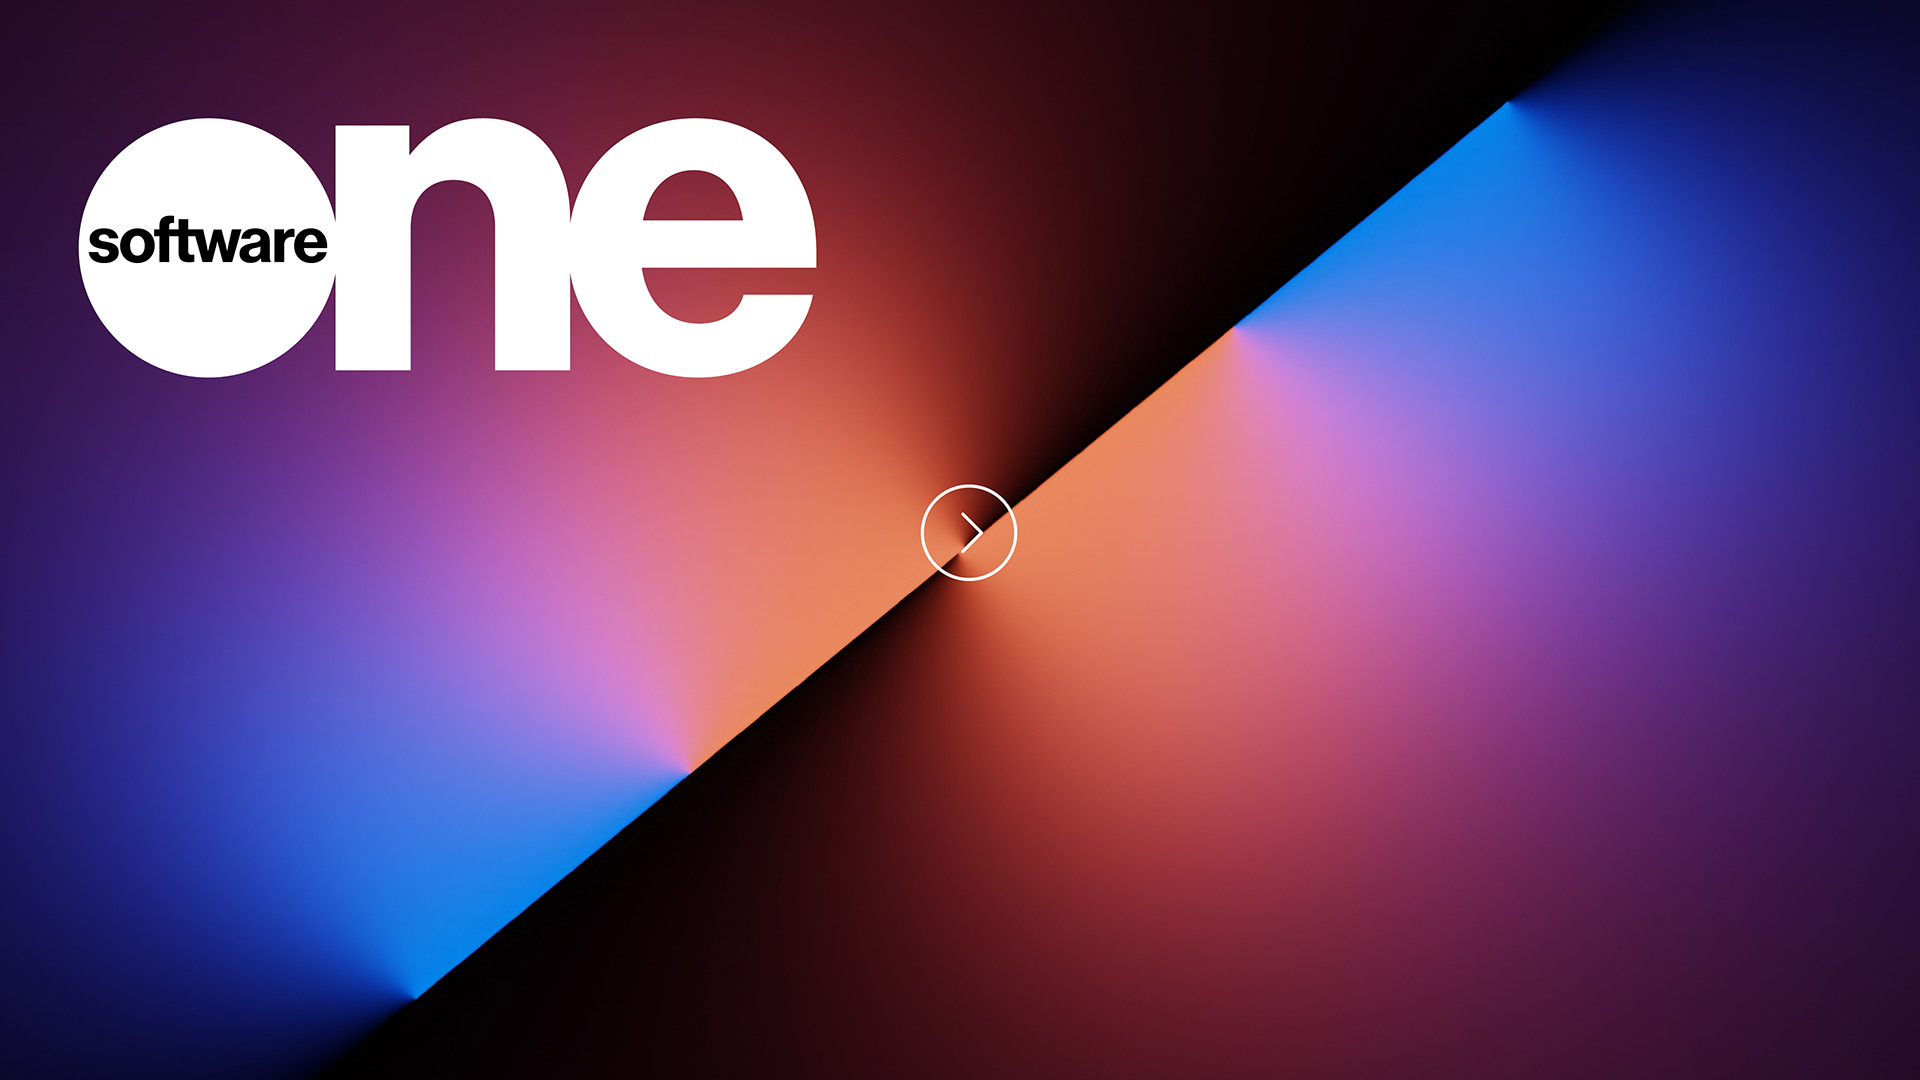 The software one logo is shown on a colorful background.